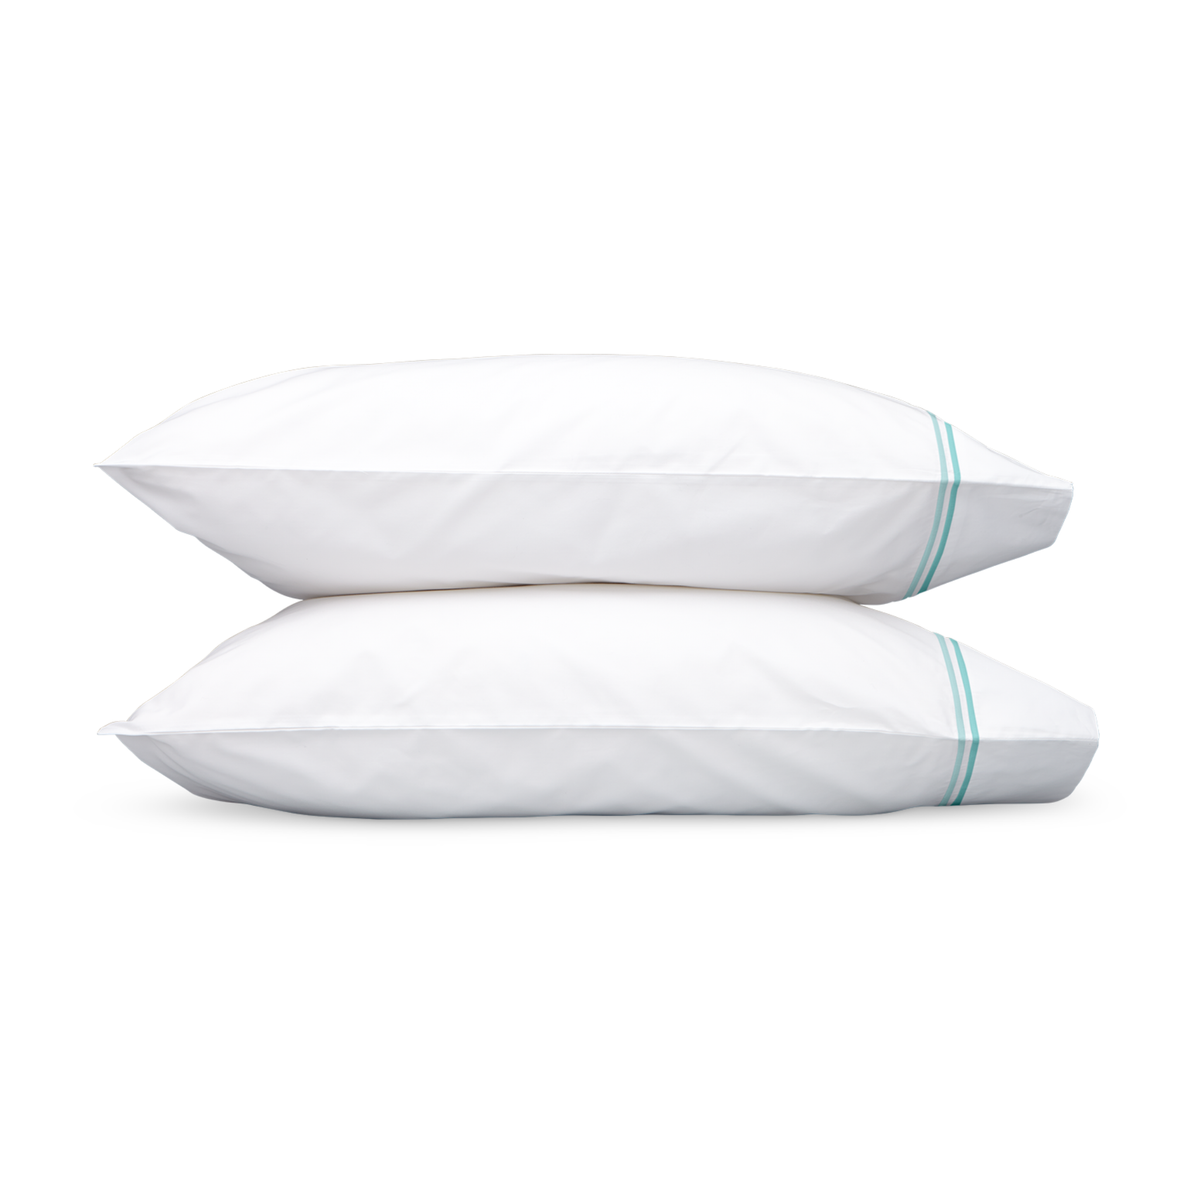 Pair of Pillowcases of Matouk Essex Bedding Collection in Lagoon Color